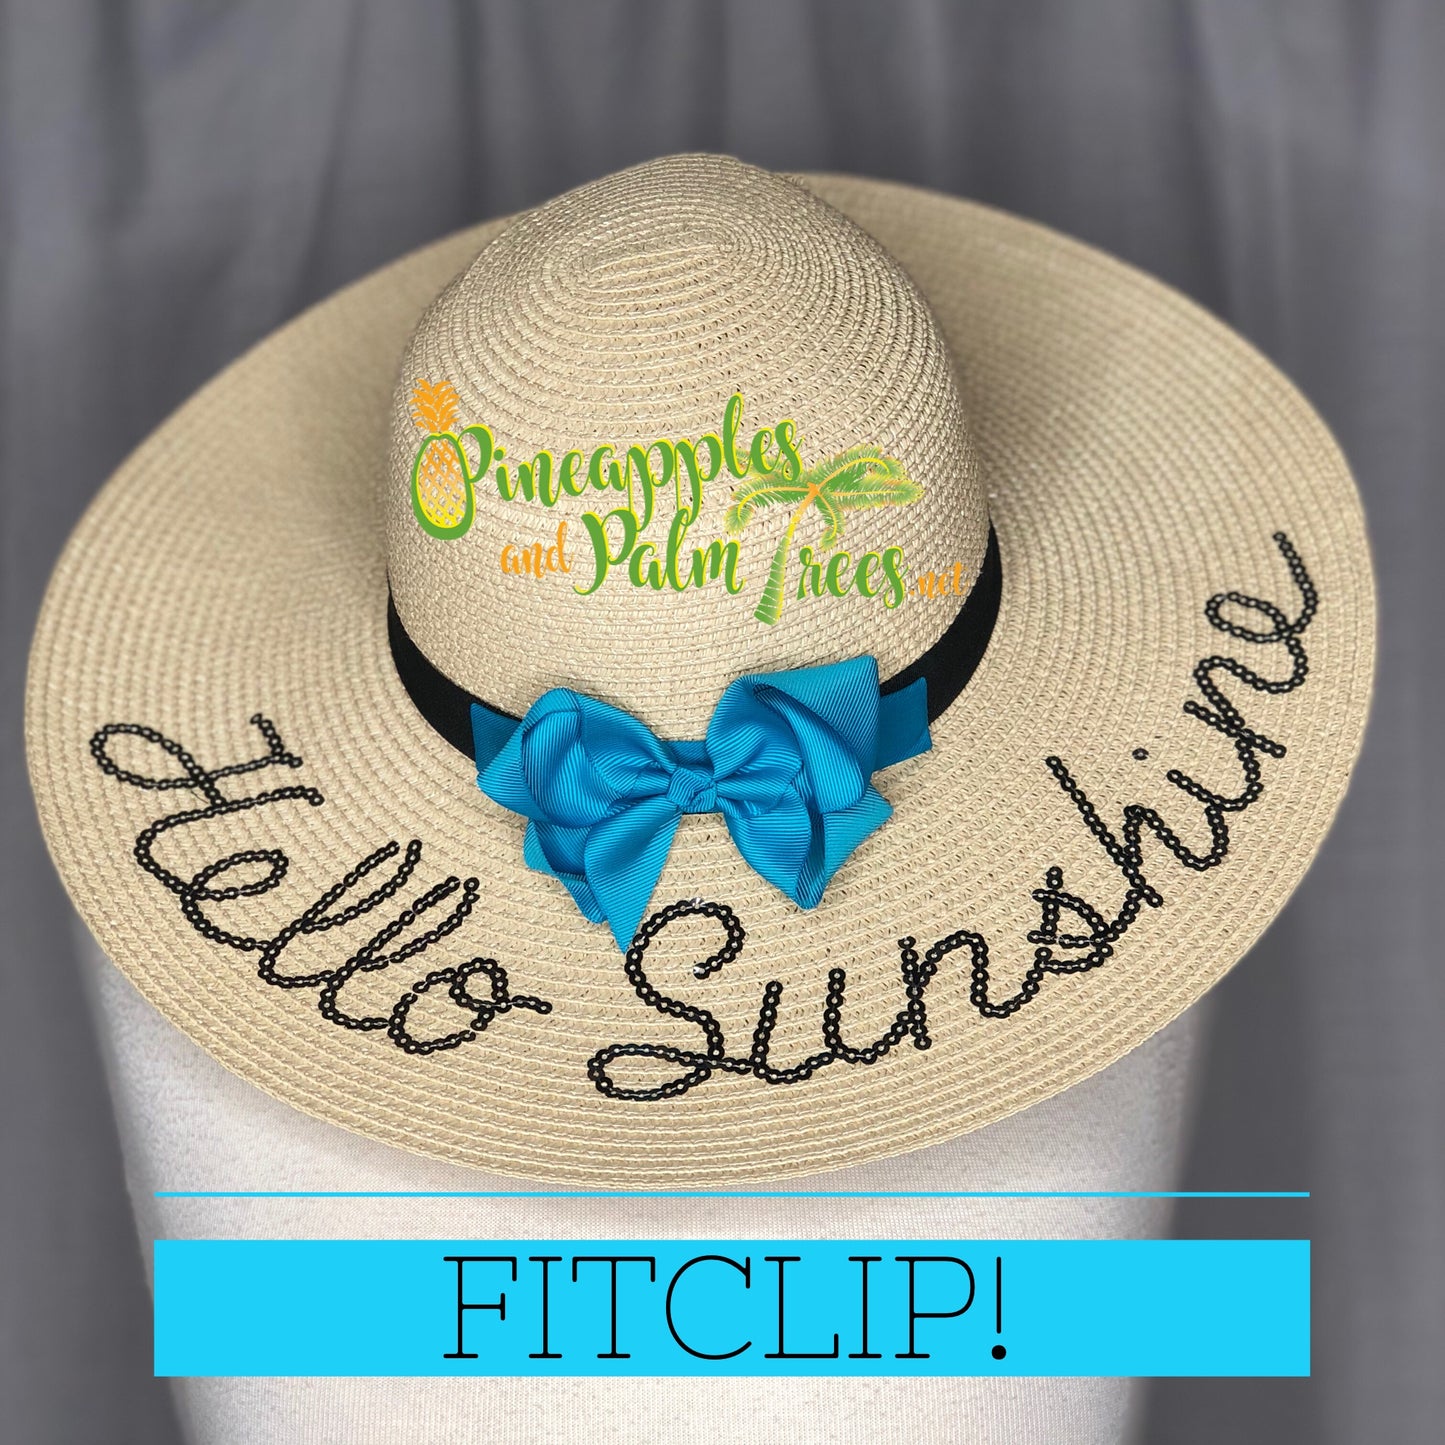 Ladies sun hat that has Hello Sunshine embroidered across the top brim.  An aqua blue FitClip with a bow is attached to the band, as a demo example of how to style a FitClip.  Sun hat is resting on a fabric mannequin with a gray background.